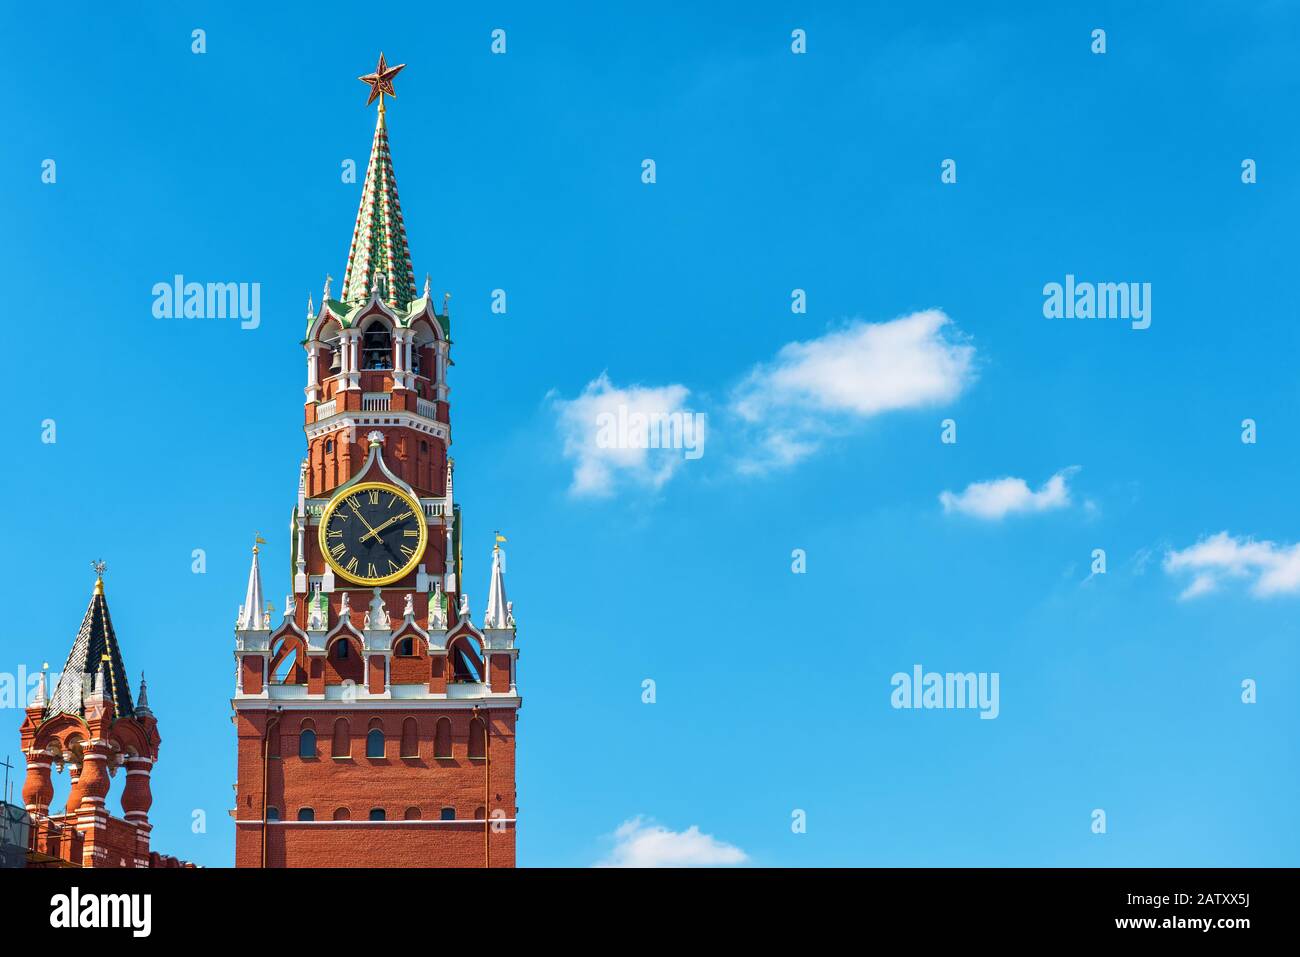 The Spasskaya tower of Moscow Kremlin, Russia. The Moscow Kremlin is the residence of the Russian president and the main tourist attraction of Moscow. Stock Photo